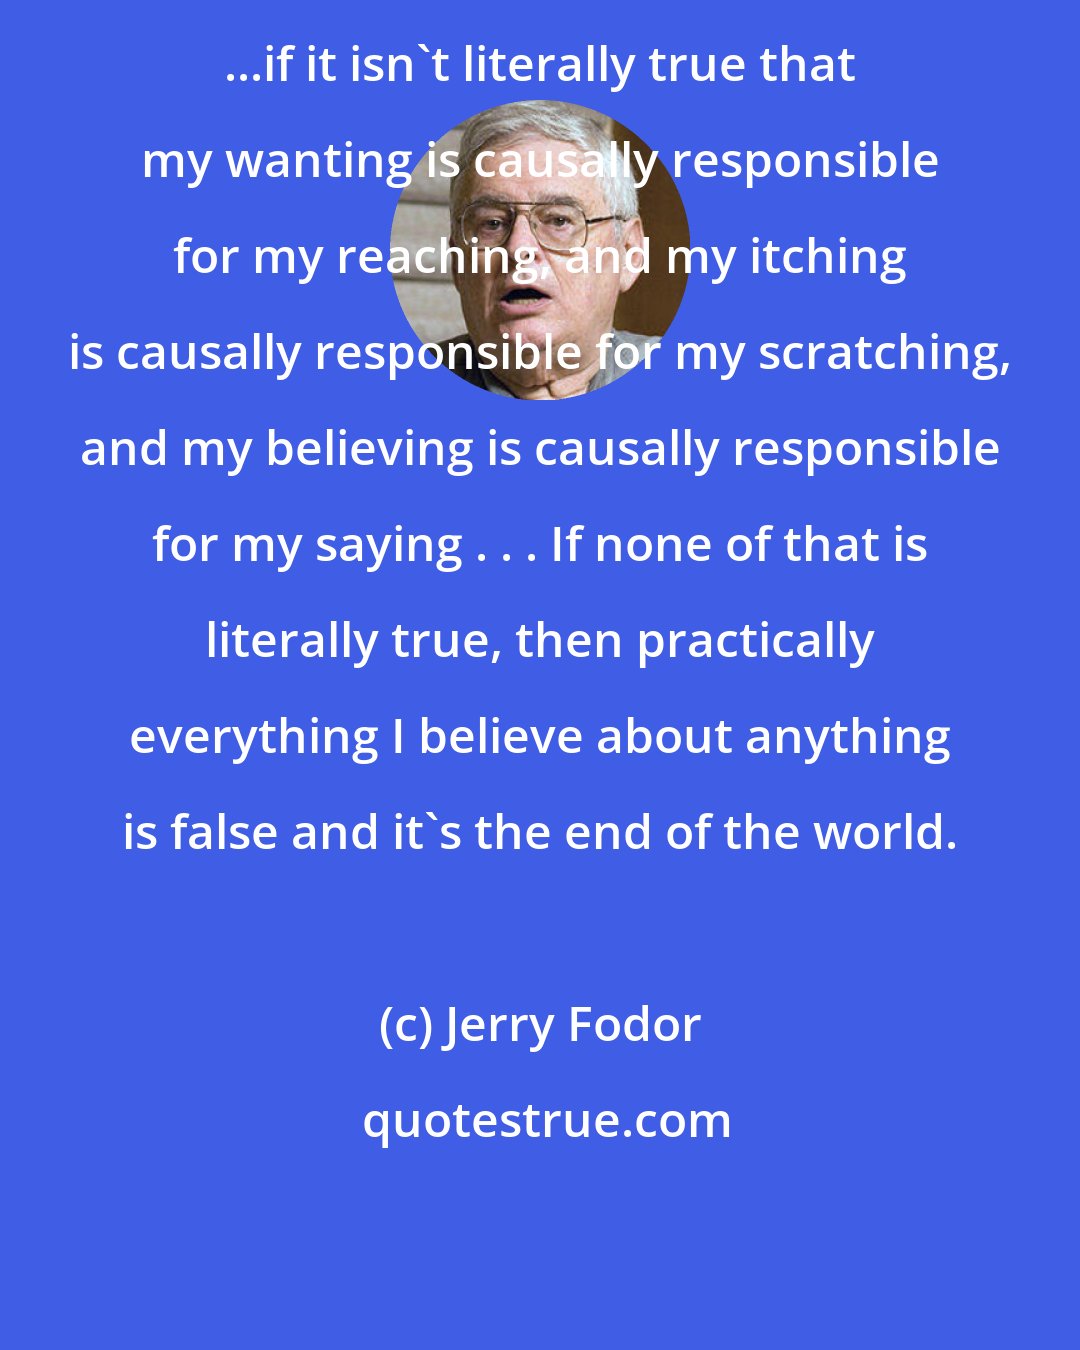 Jerry Fodor: ...if it isn't literally true that my wanting is causally responsible for my reaching, and my itching is causally responsible for my scratching, and my believing is causally responsible for my saying . . . If none of that is literally true, then practically everything I believe about anything is false and it's the end of the world.